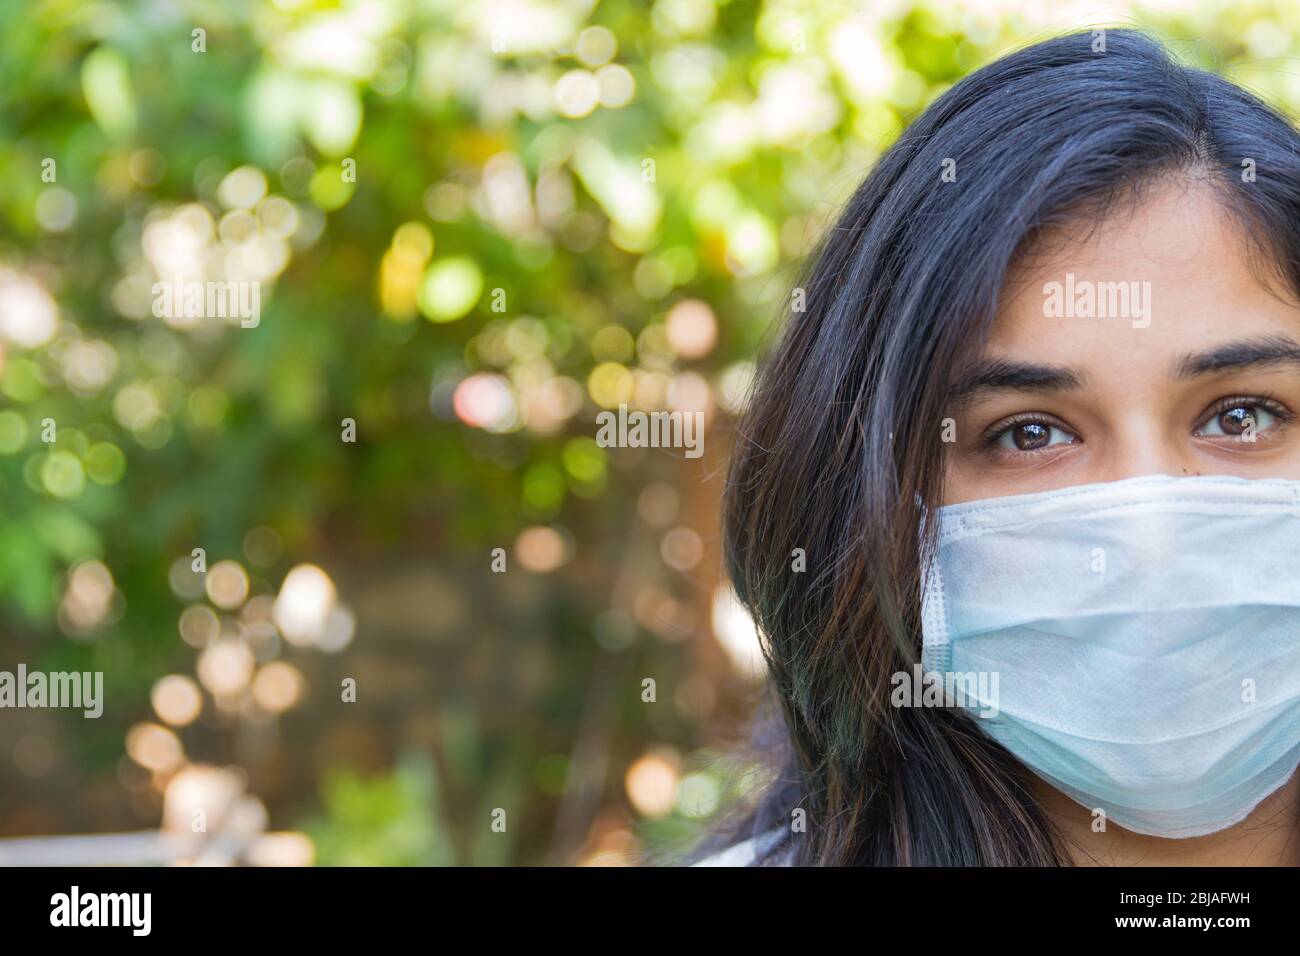 half face portrait of an indian girl wearing a face mask during covid ...